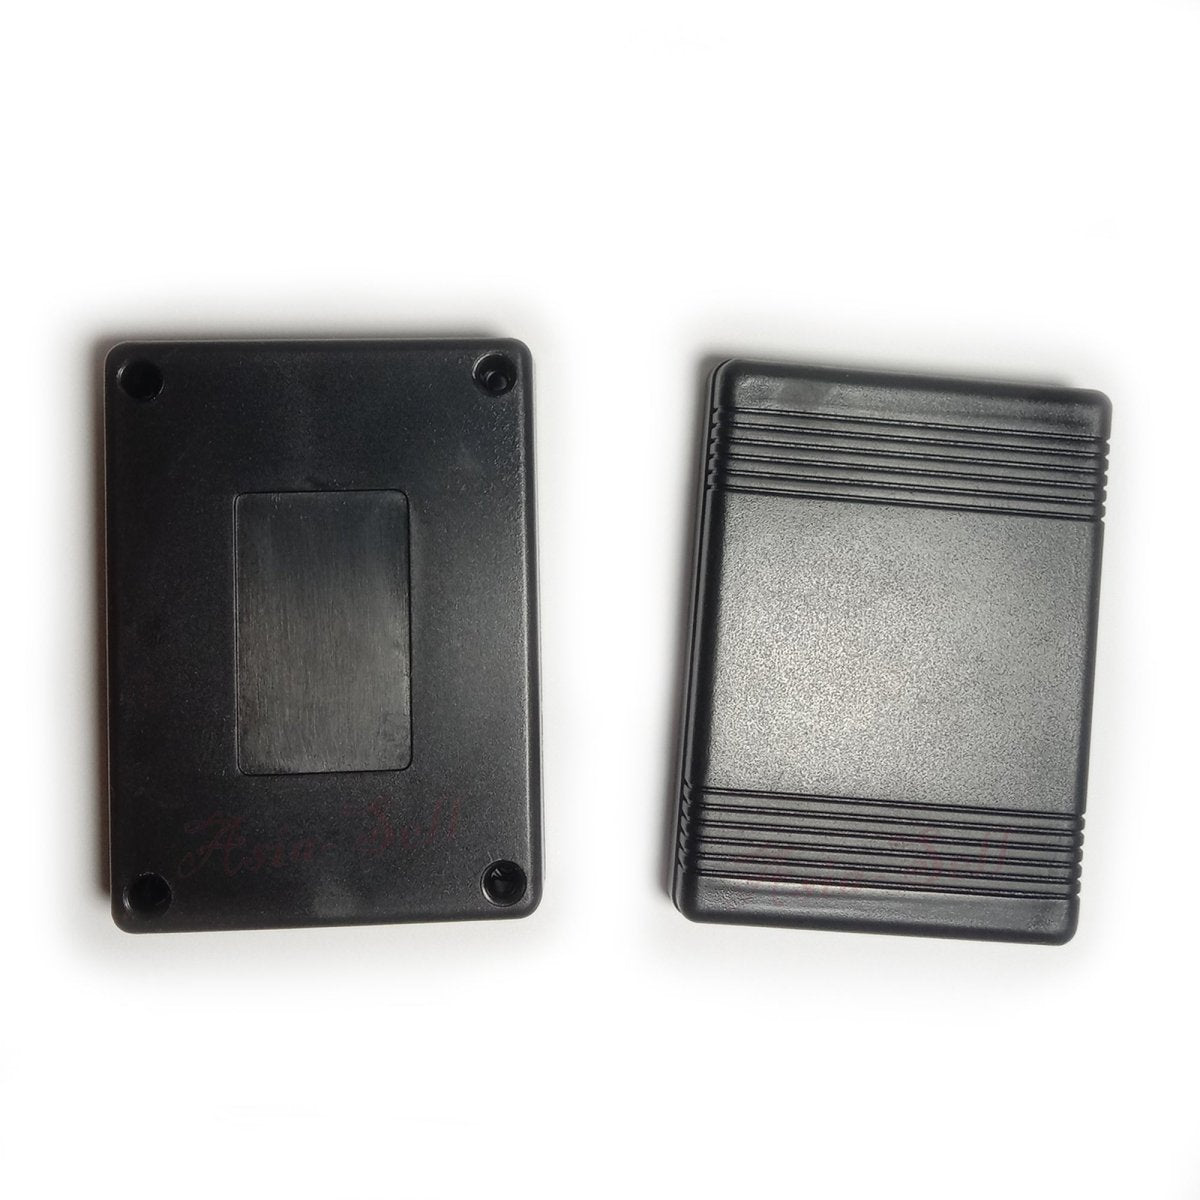 2 Boxes ABS Project Boxes Electronic Enclosure Junction 90x65x36mm Black Junction Box - Asia Sell